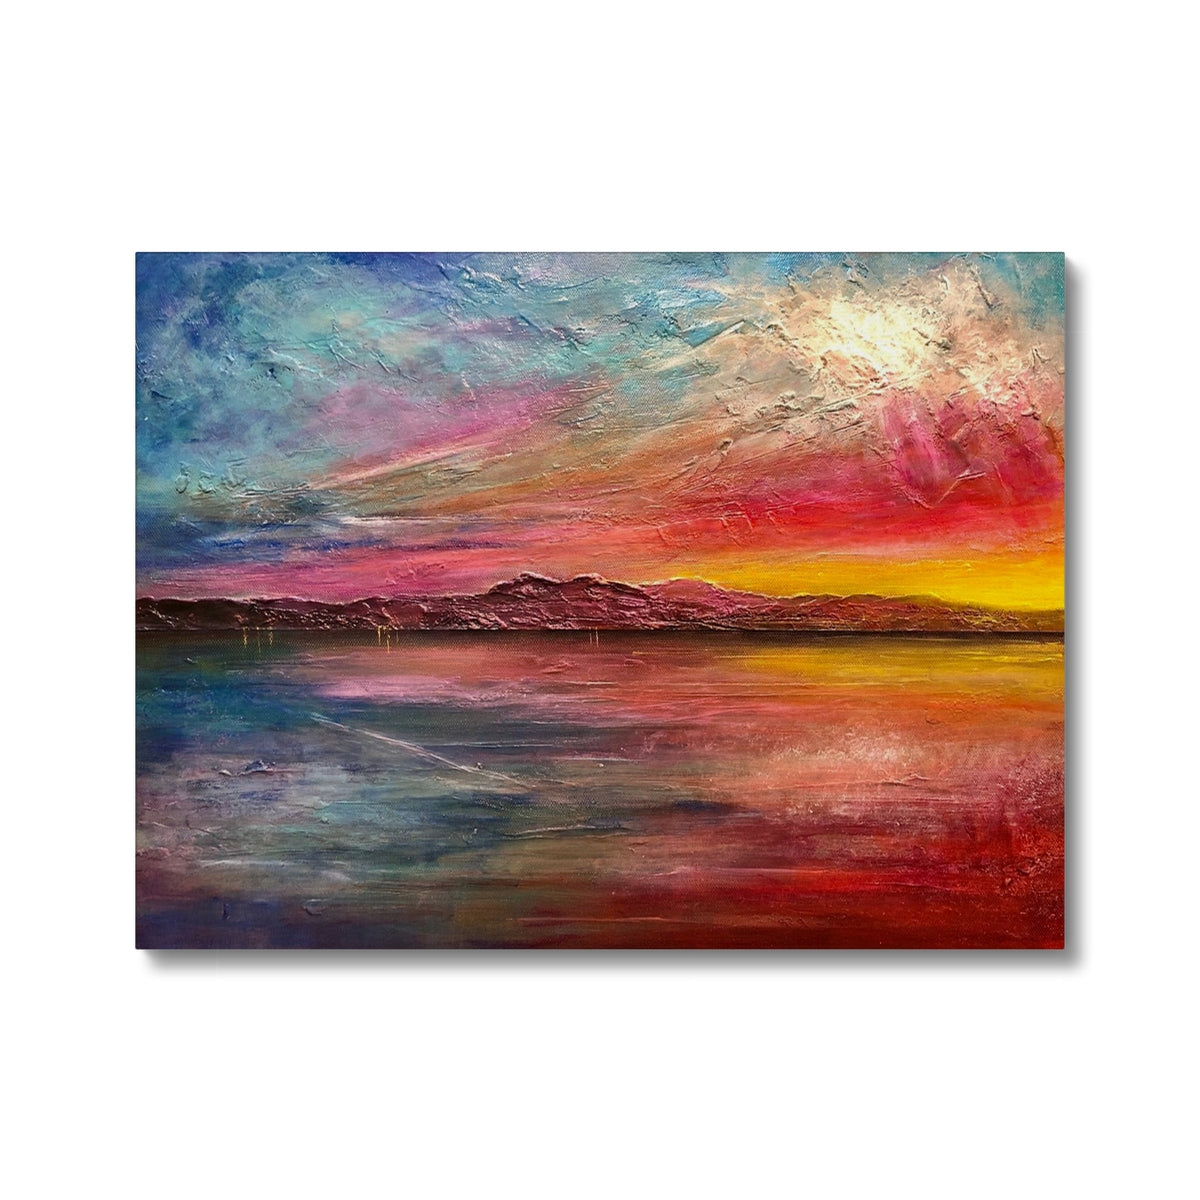 Arran Sunset ii Painting | Canvas From Scotland-Contemporary Stretched Canvas Prints-Arran Art Gallery-24"x18"-Paintings, Prints, Homeware, Art Gifts From Scotland By Scottish Artist Kevin Hunter